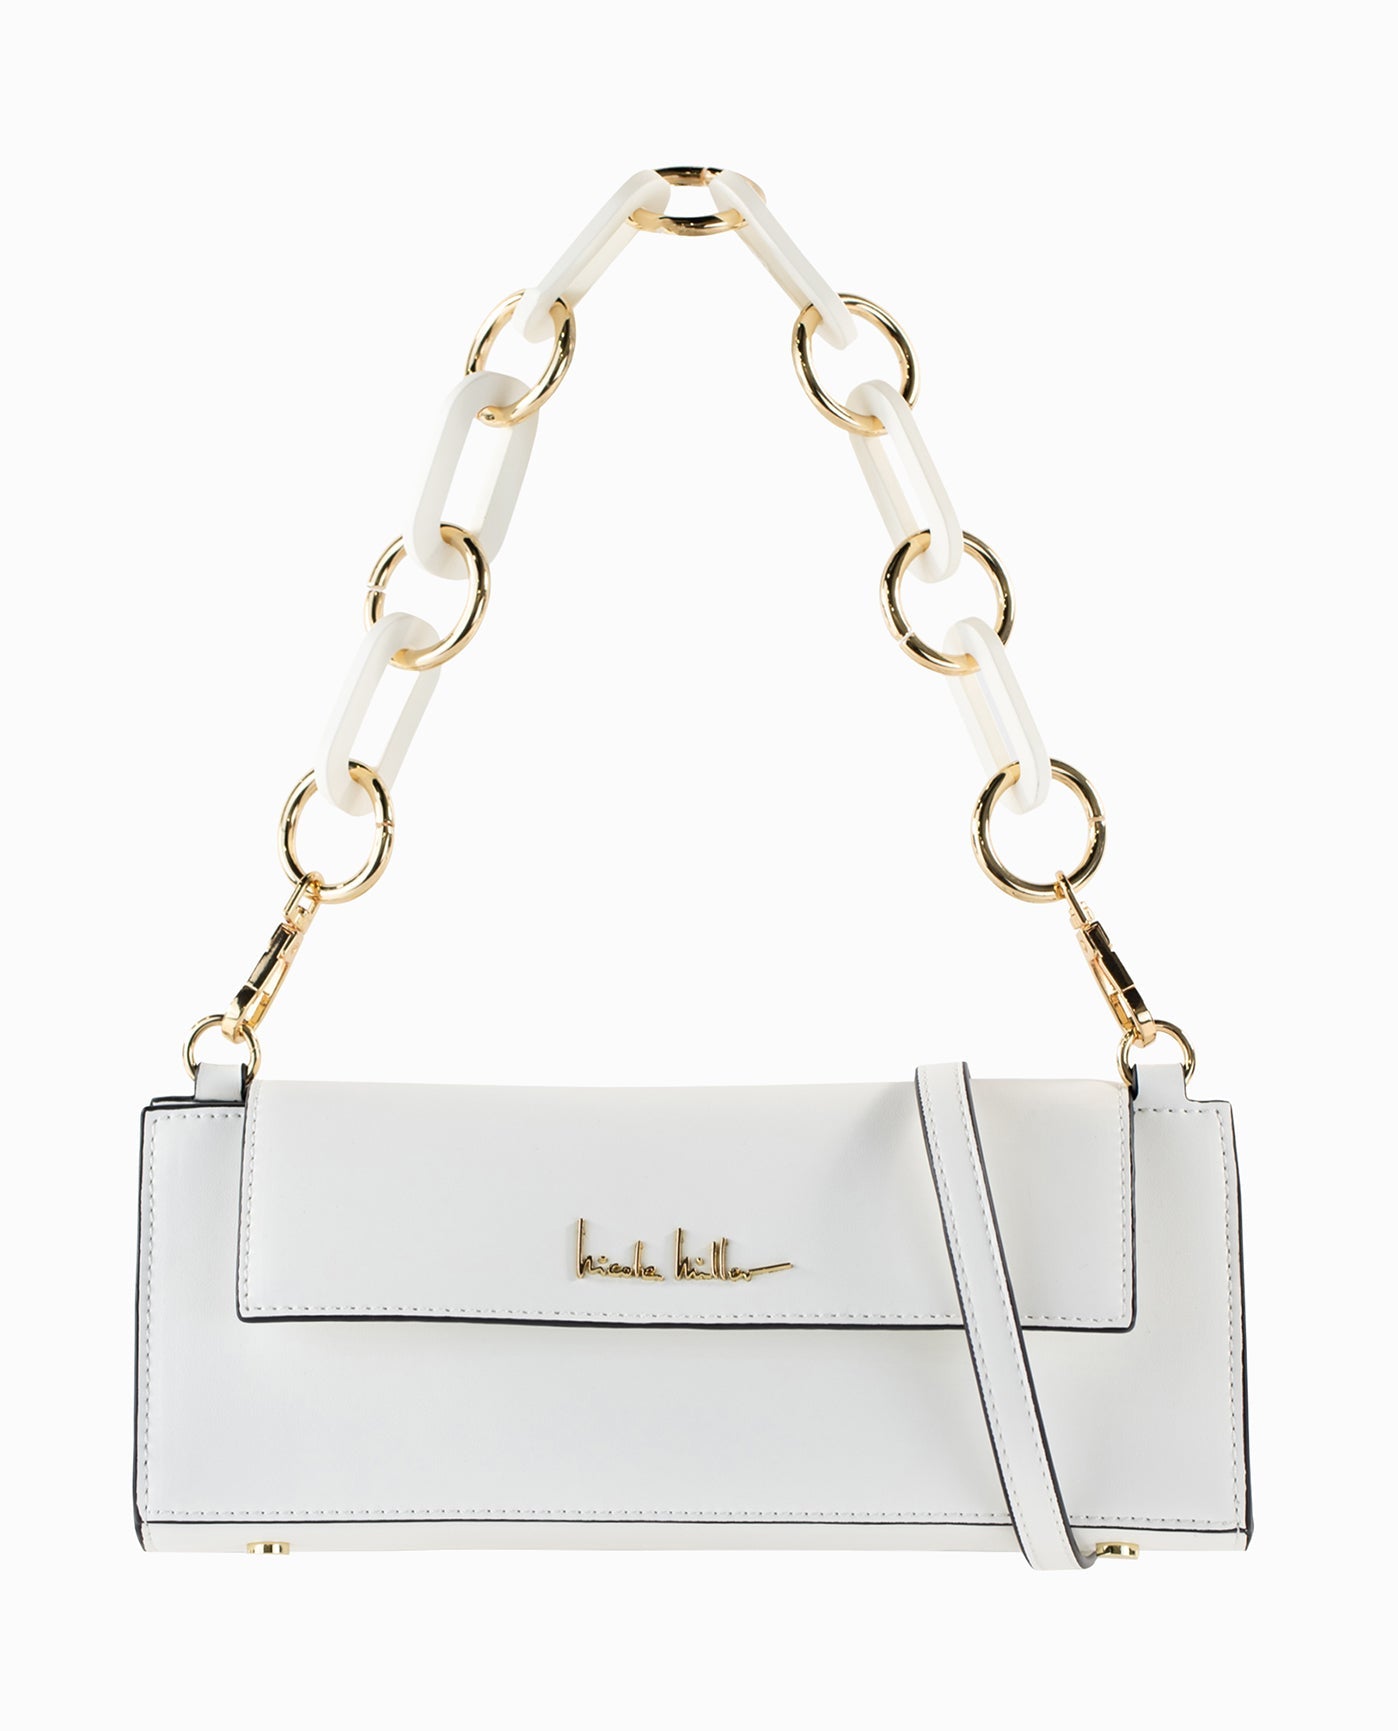 White Long Shoulder Bag and Strap with Chain Like Design and Gold Details | Bright White